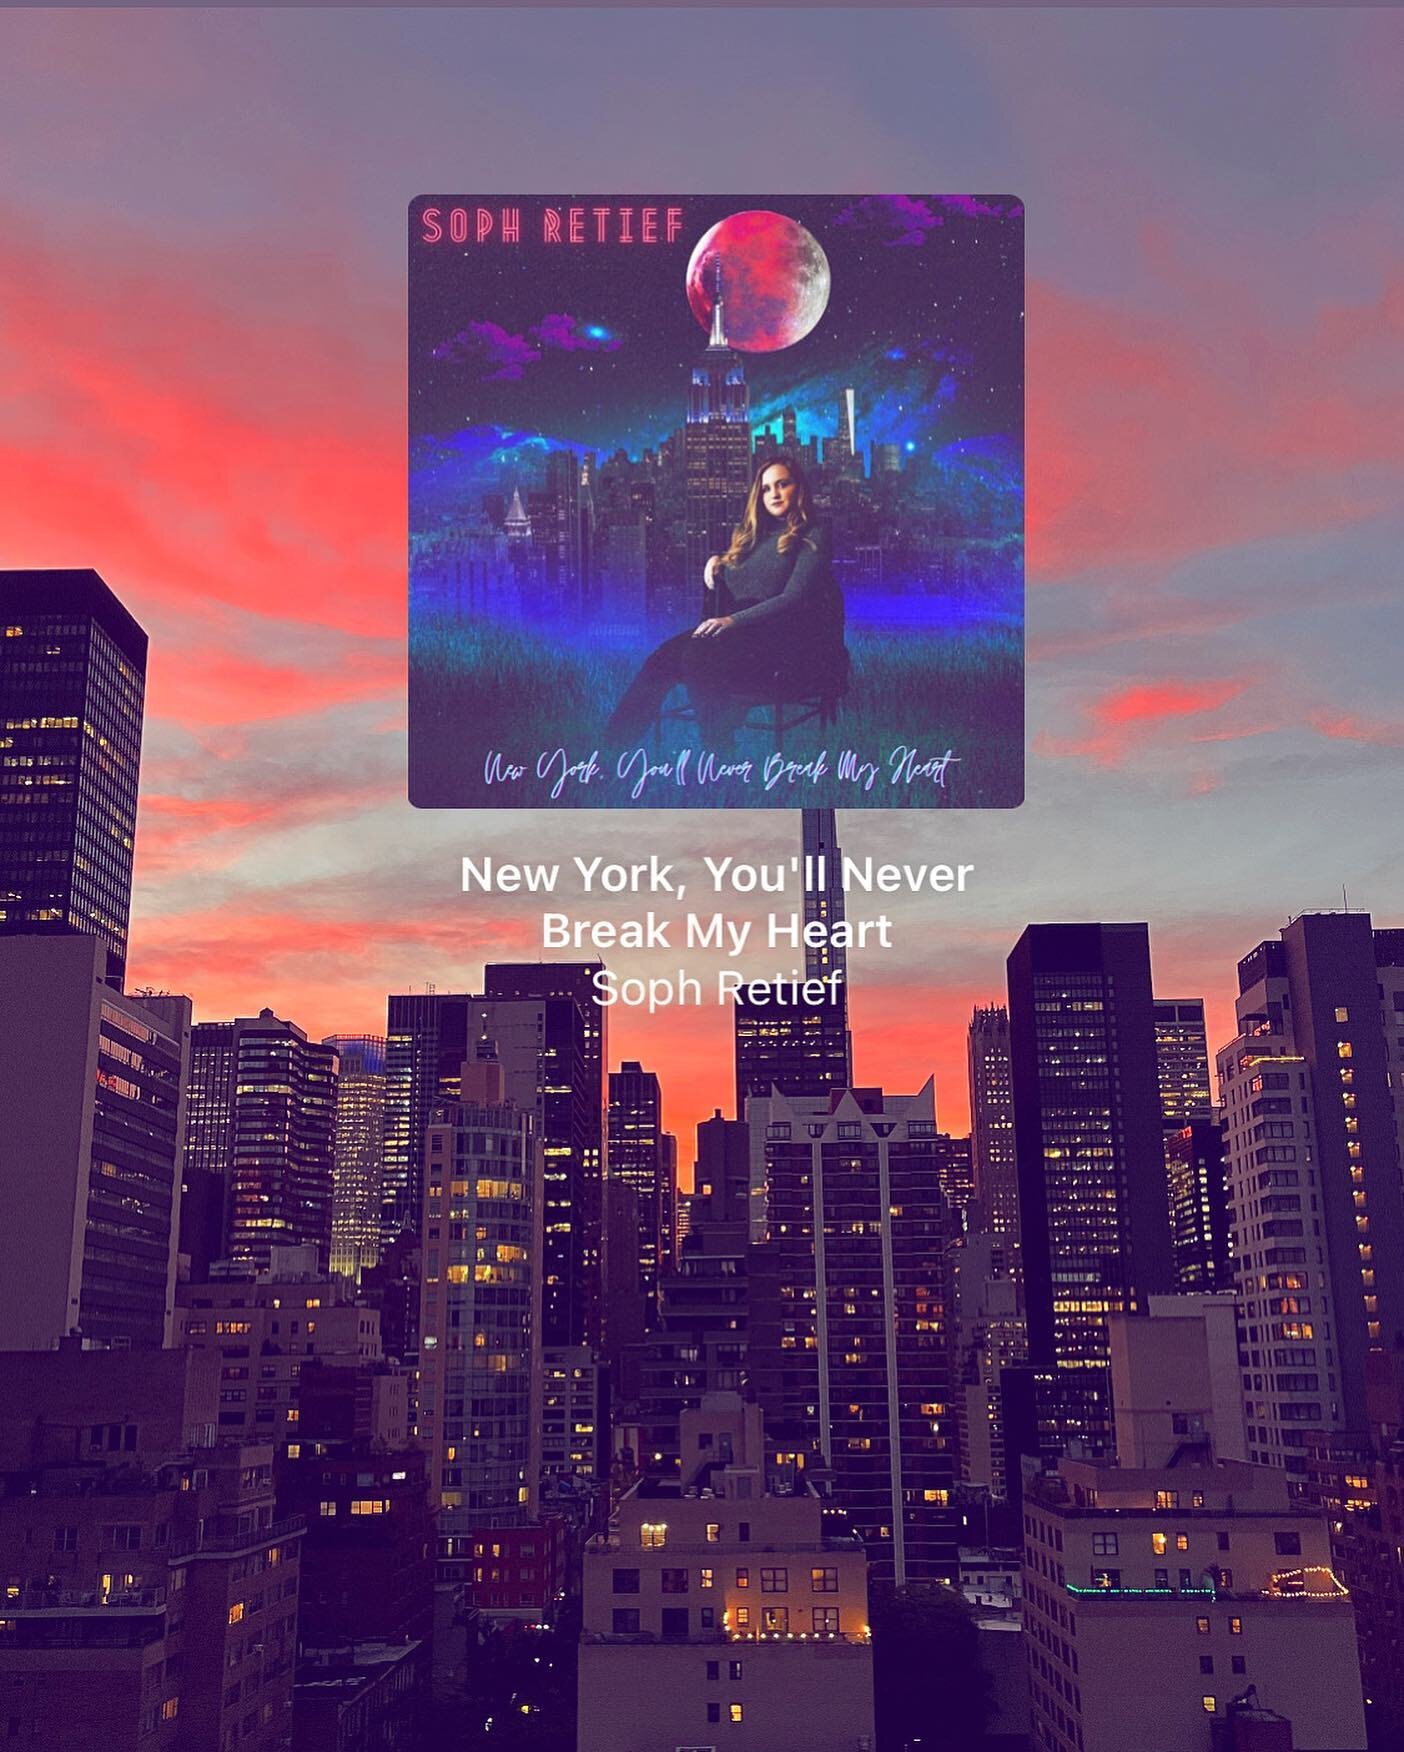 &ldquo;New York, You&rsquo;ll Never Break My Heart&rdquo; is out everywhere now 🥹&hearts;️ So excited for everyone to finally hear this song, thank you so much again to @ax.el for working so hard to bring my vision to life 🥹 

Hope you love it as m